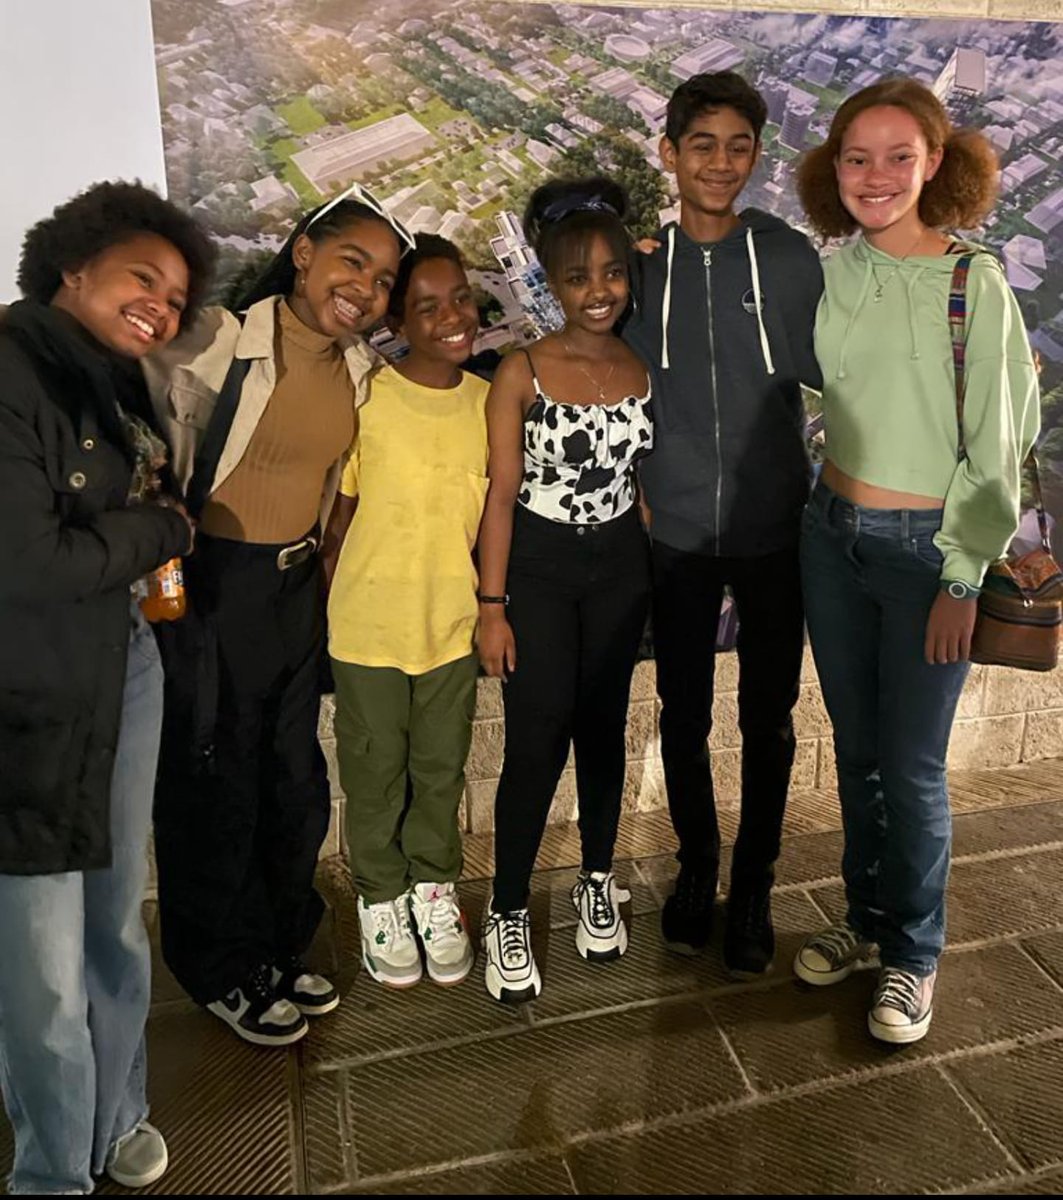 NATGEO meets DISNEY😀

Hanging with talented African cast for #TeamSayari (NatGeo) who had come for the screening. They loved our film (Disney) and my performance voicing the lead character ENKAI😍

#Disney #Enkai #Animation #Voice #KizaziMoto #nationalgeographic #natgeo